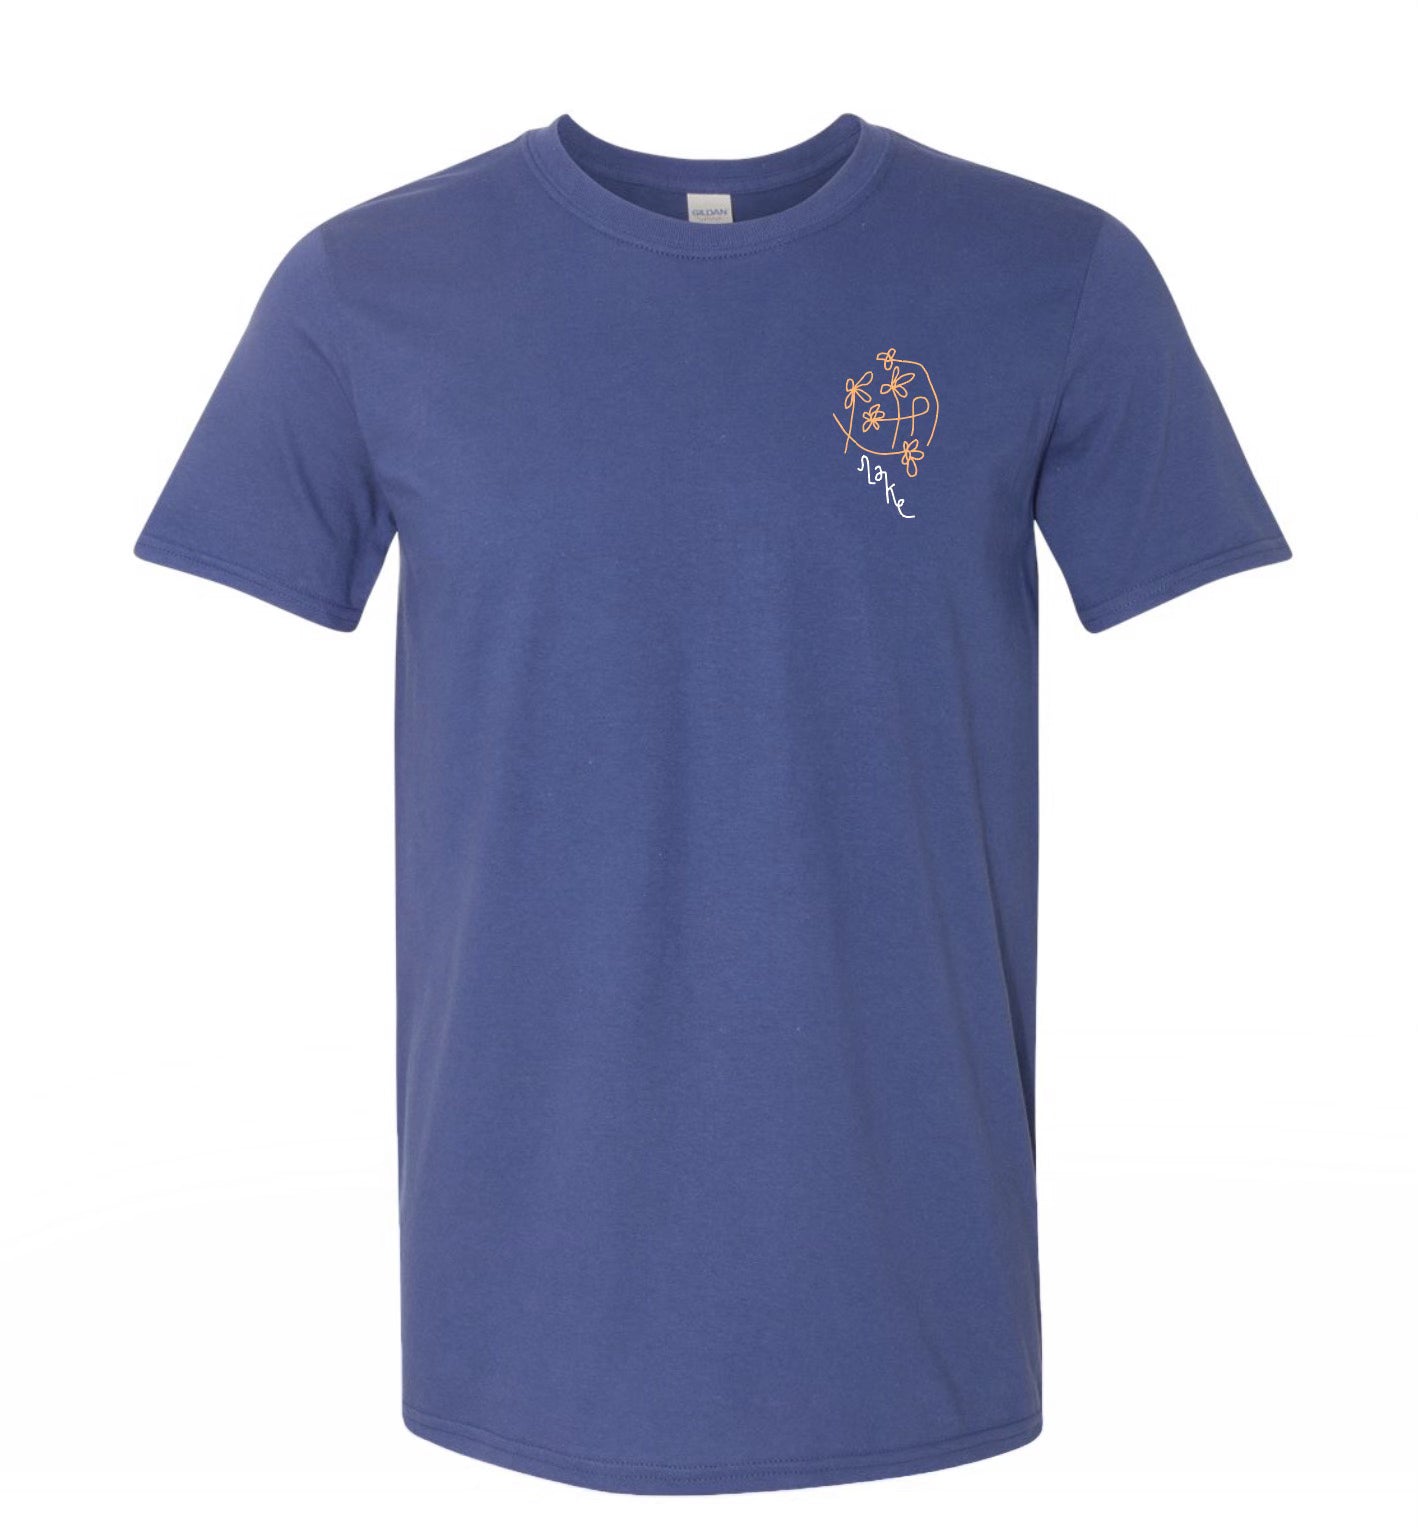 Periwinkle Flowers T-Shirt